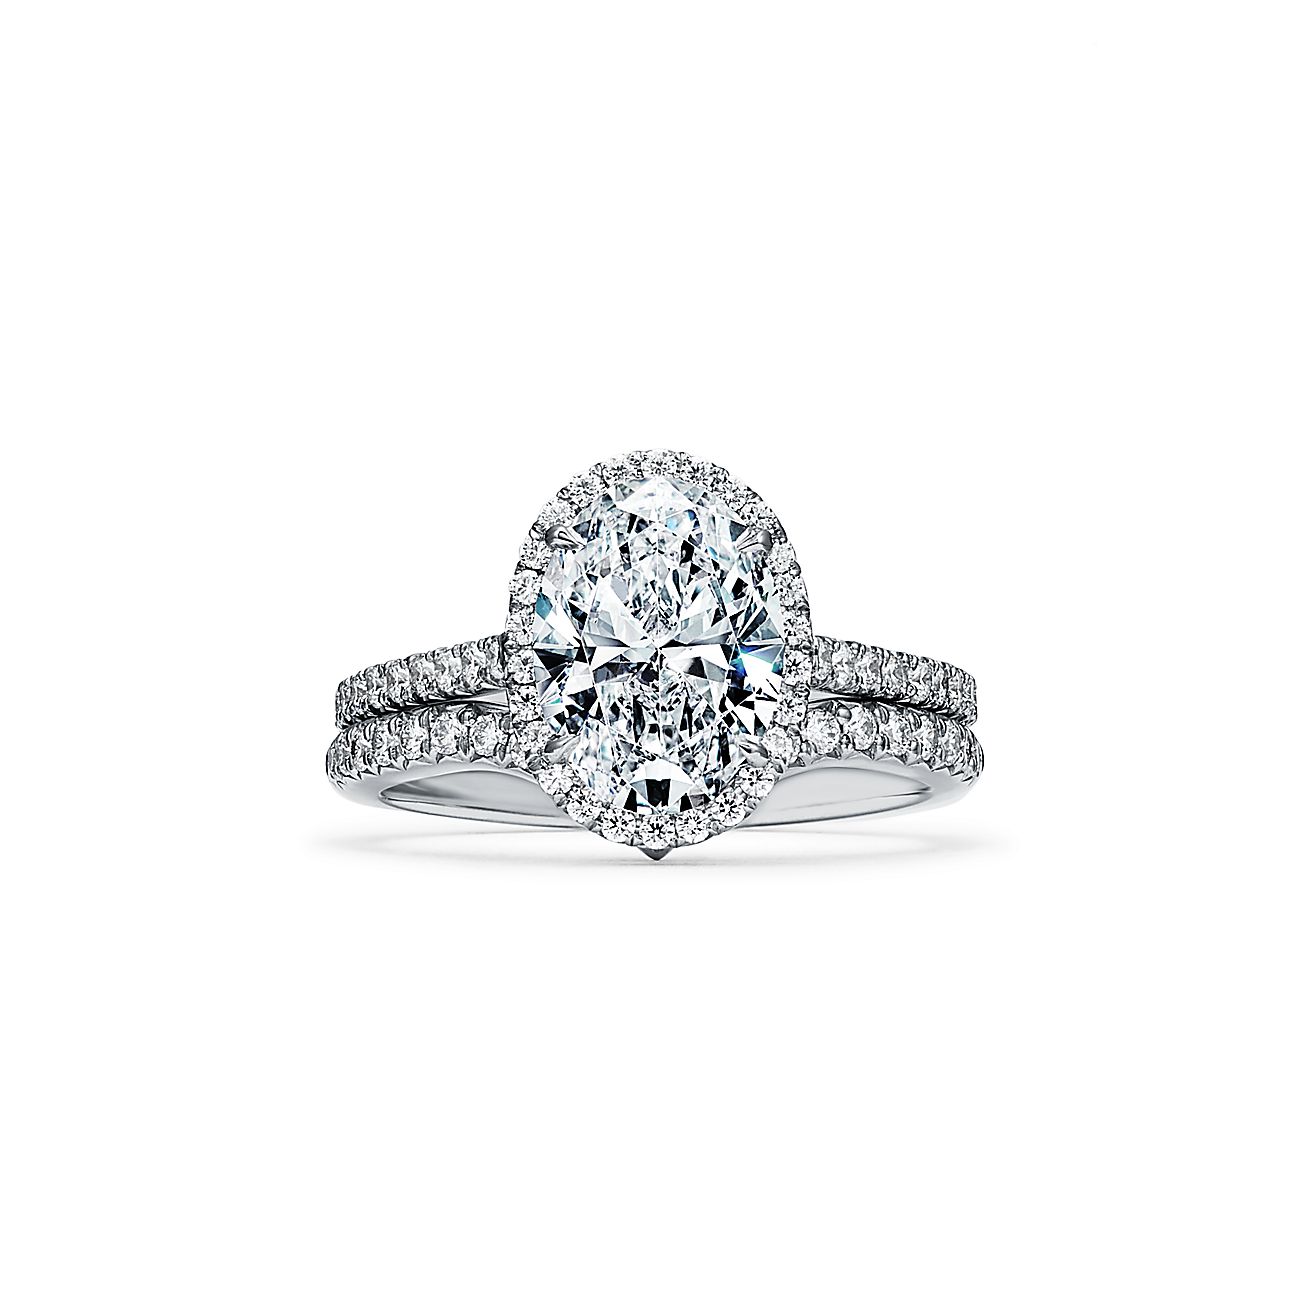 Tiffany Soleste® Oval Halo Engagement Ring With A Diamond Band In Platinum.  | Tiffany & Co.